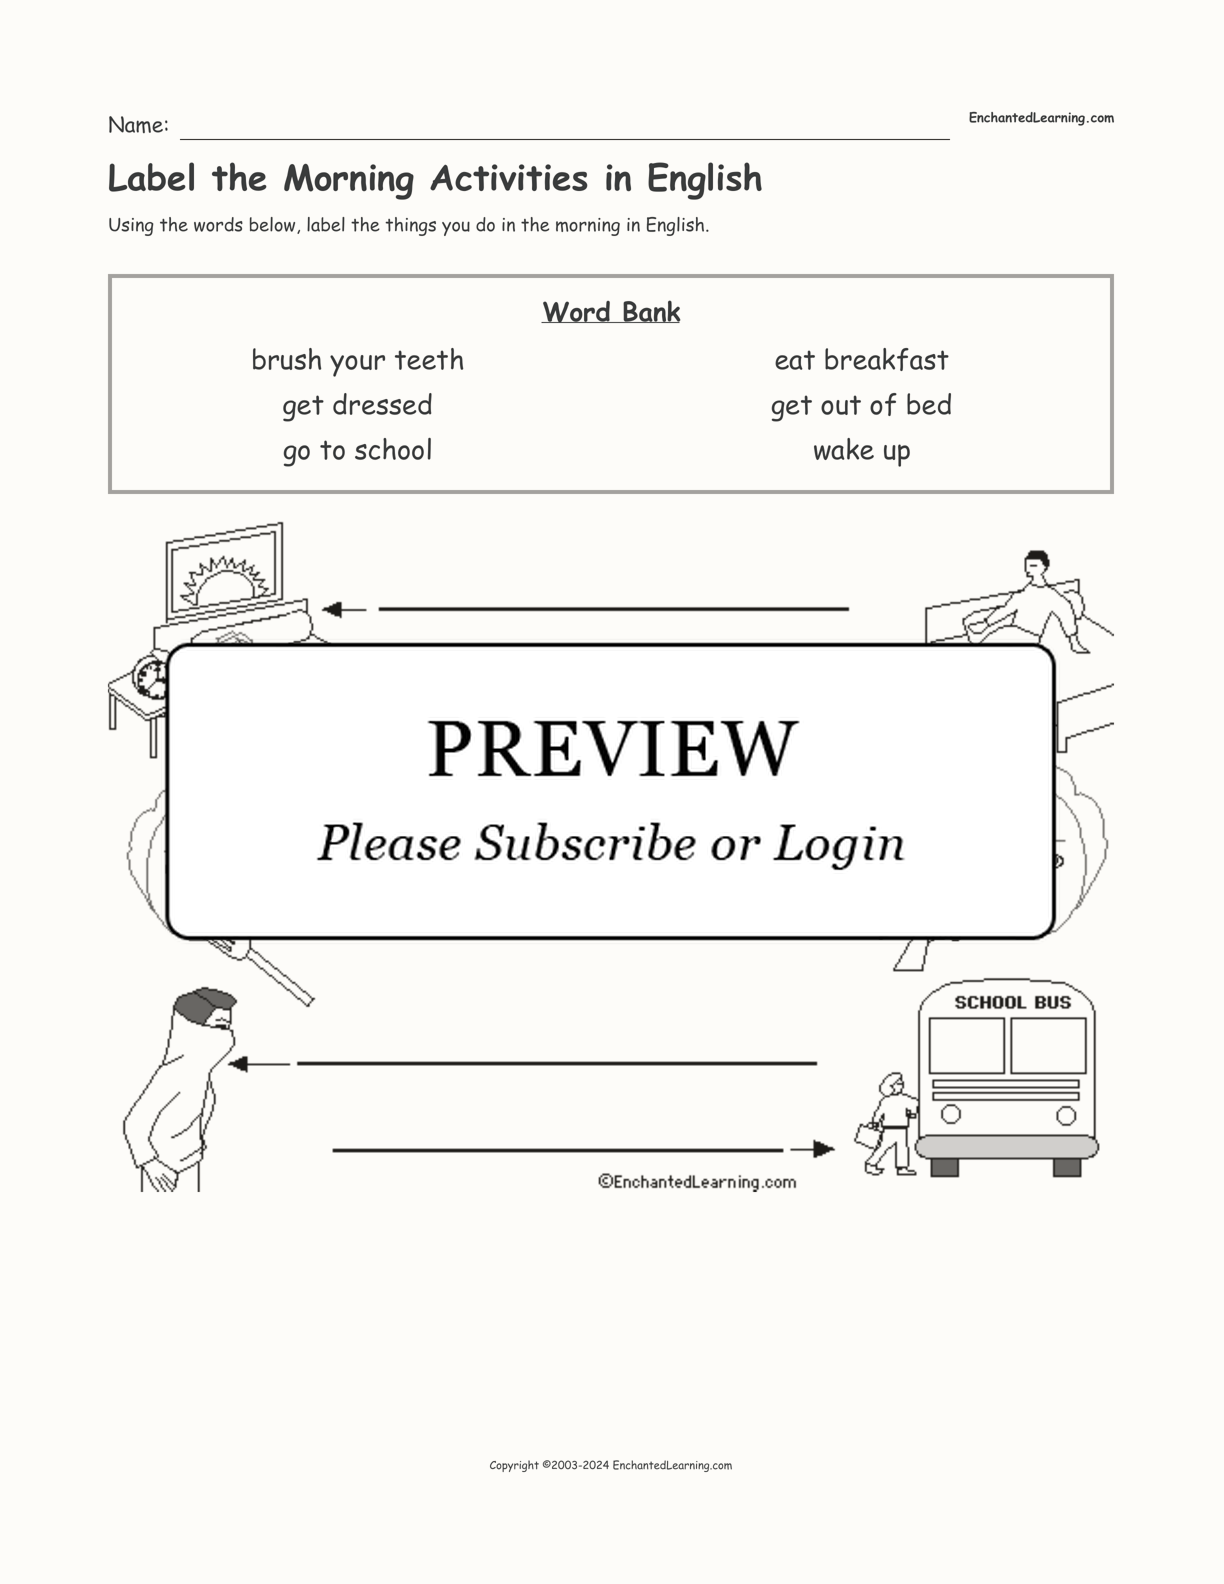 Label the Morning Activities in English interactive worksheet page 1